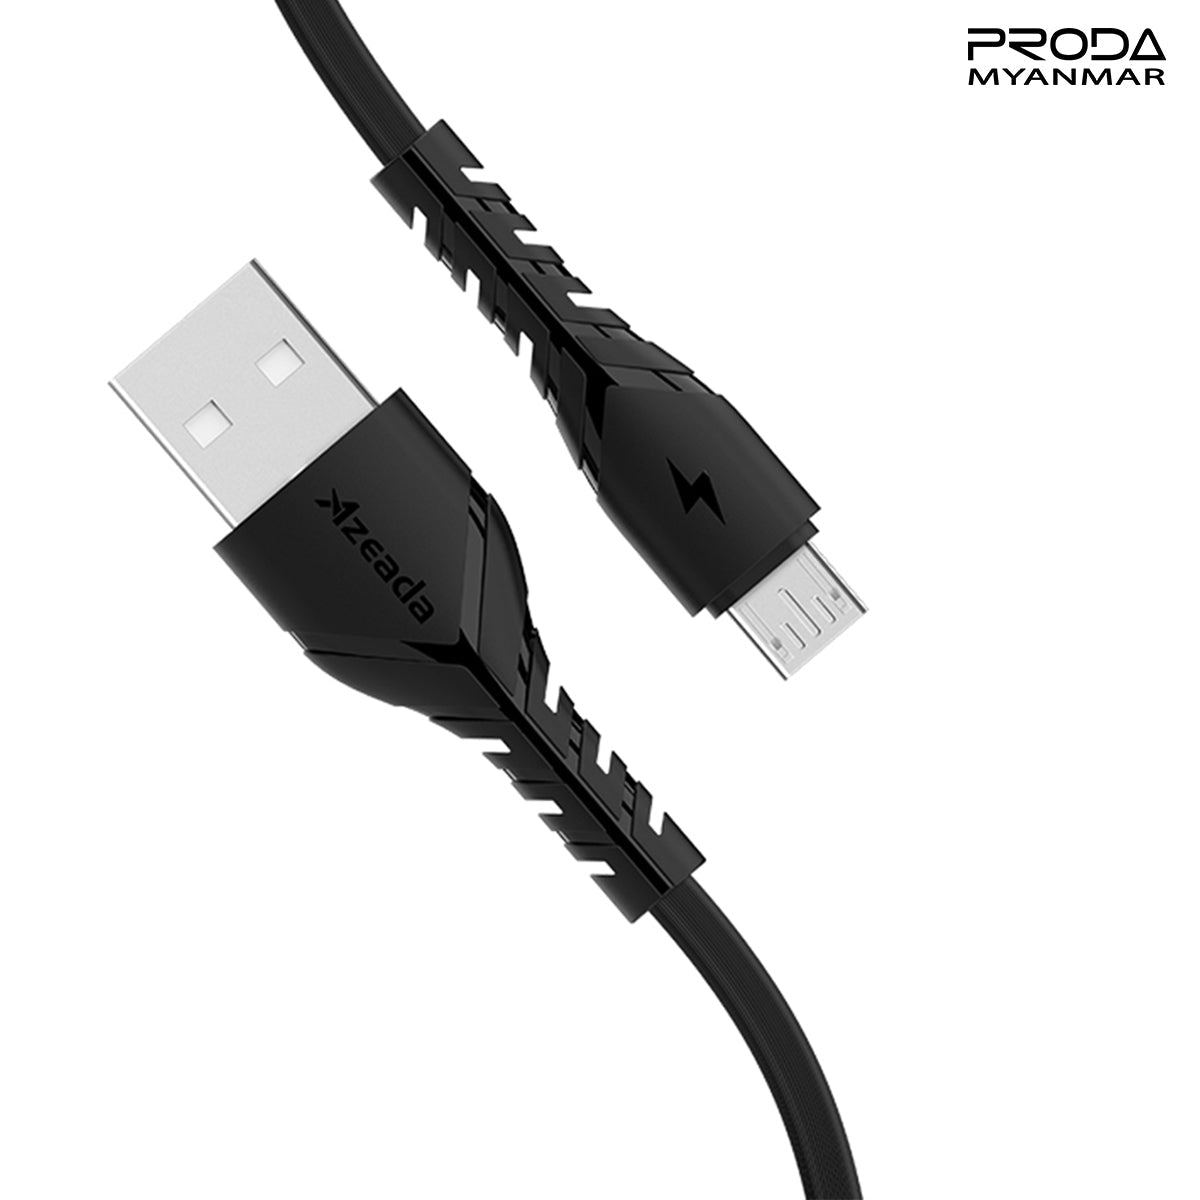 PRODA PD-B47A WING SERIES DATA CABLE FOR TYPE-C (1000MM) (3A) - Black